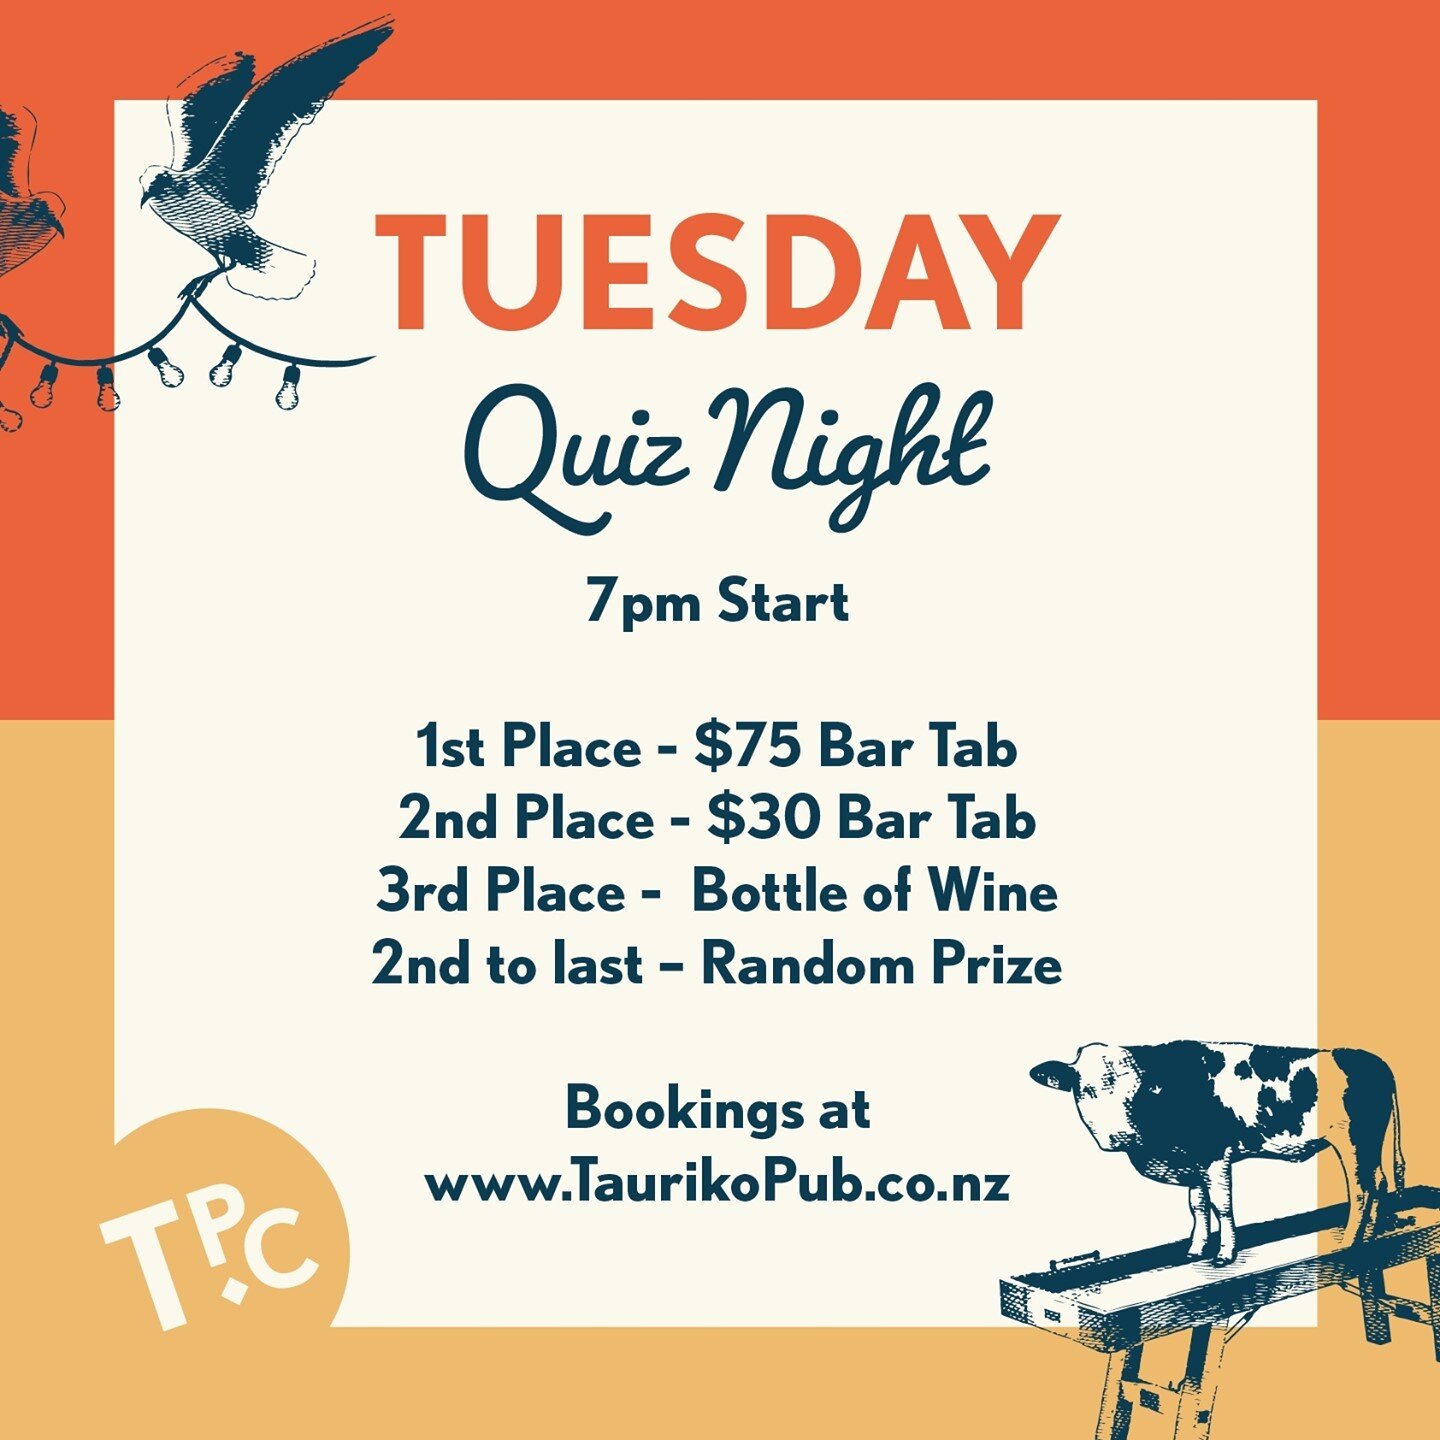 Have you been to our #QuizNight yet? Get in early, it's a blast for the smart and well, not so smart 😄